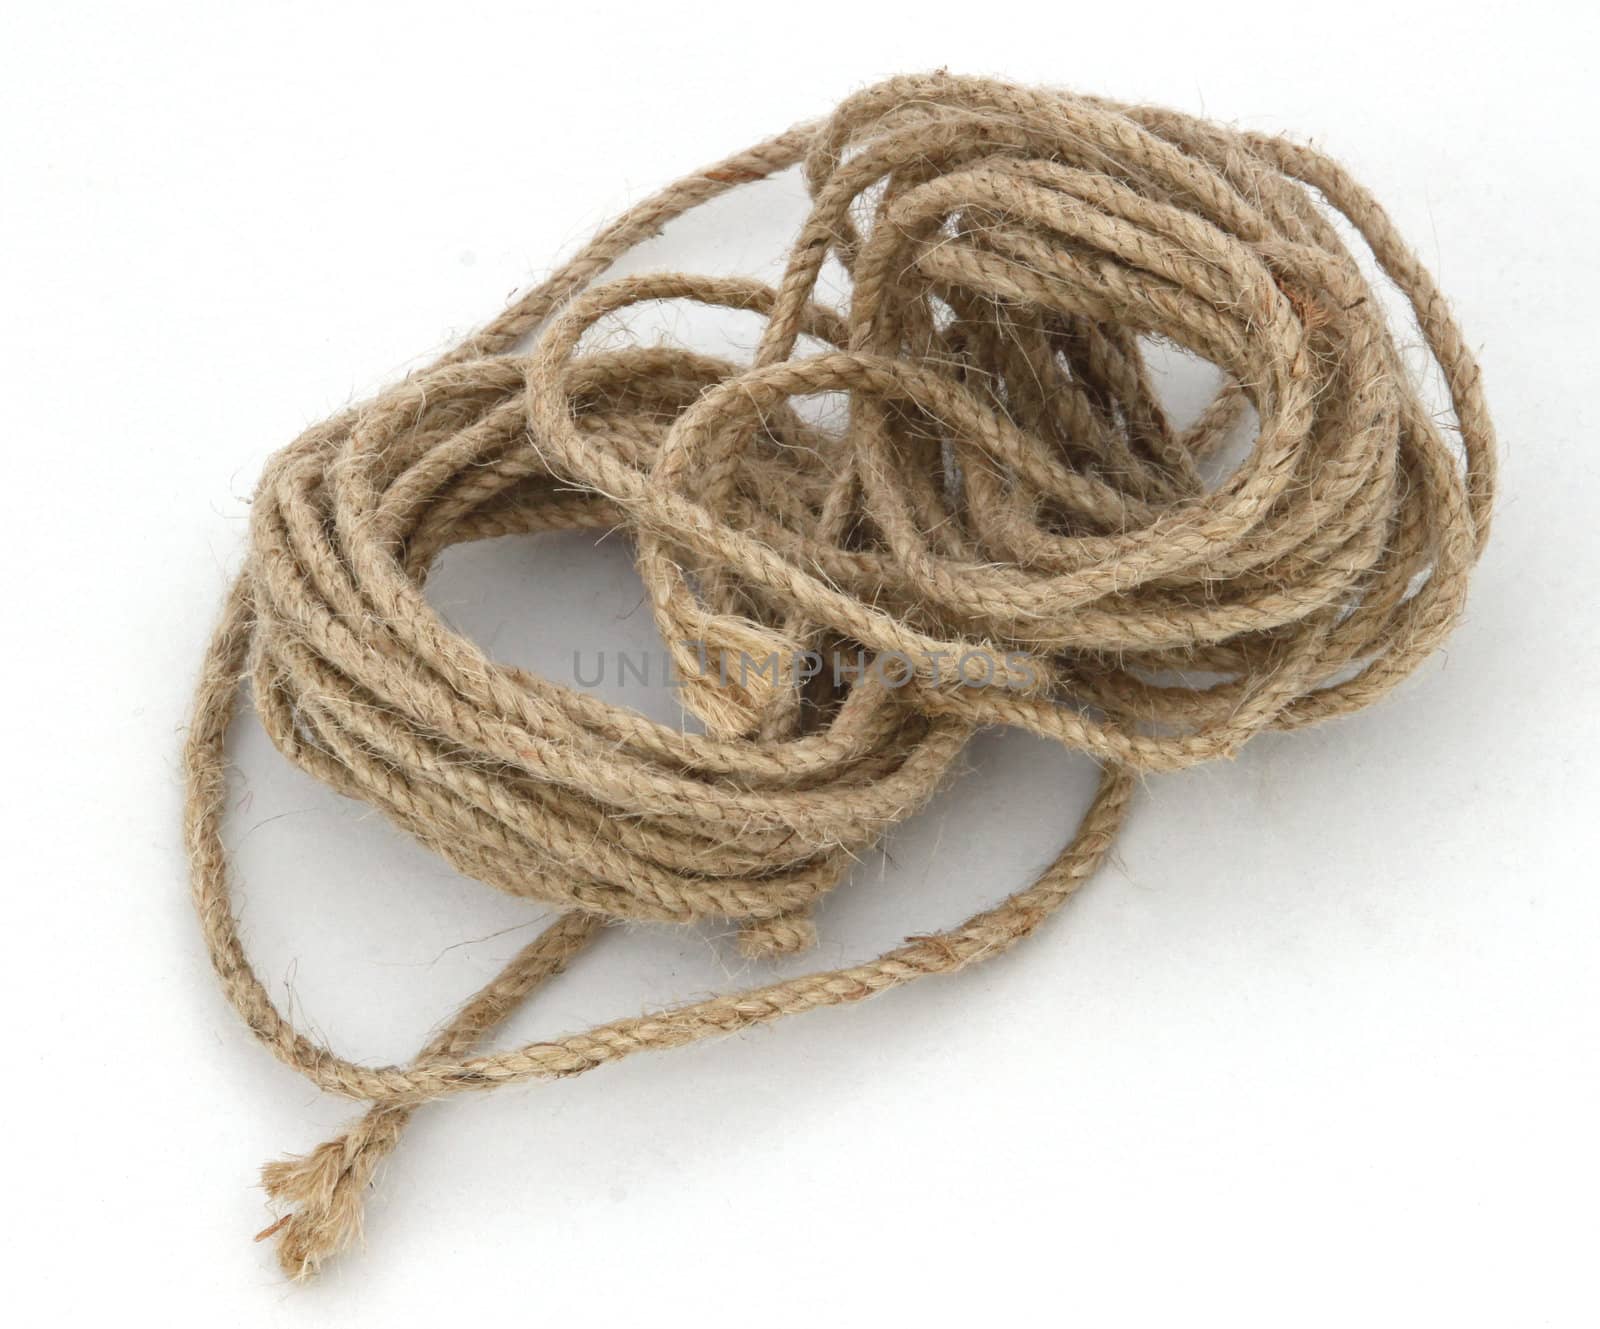 Ball of string or twine on a white background.